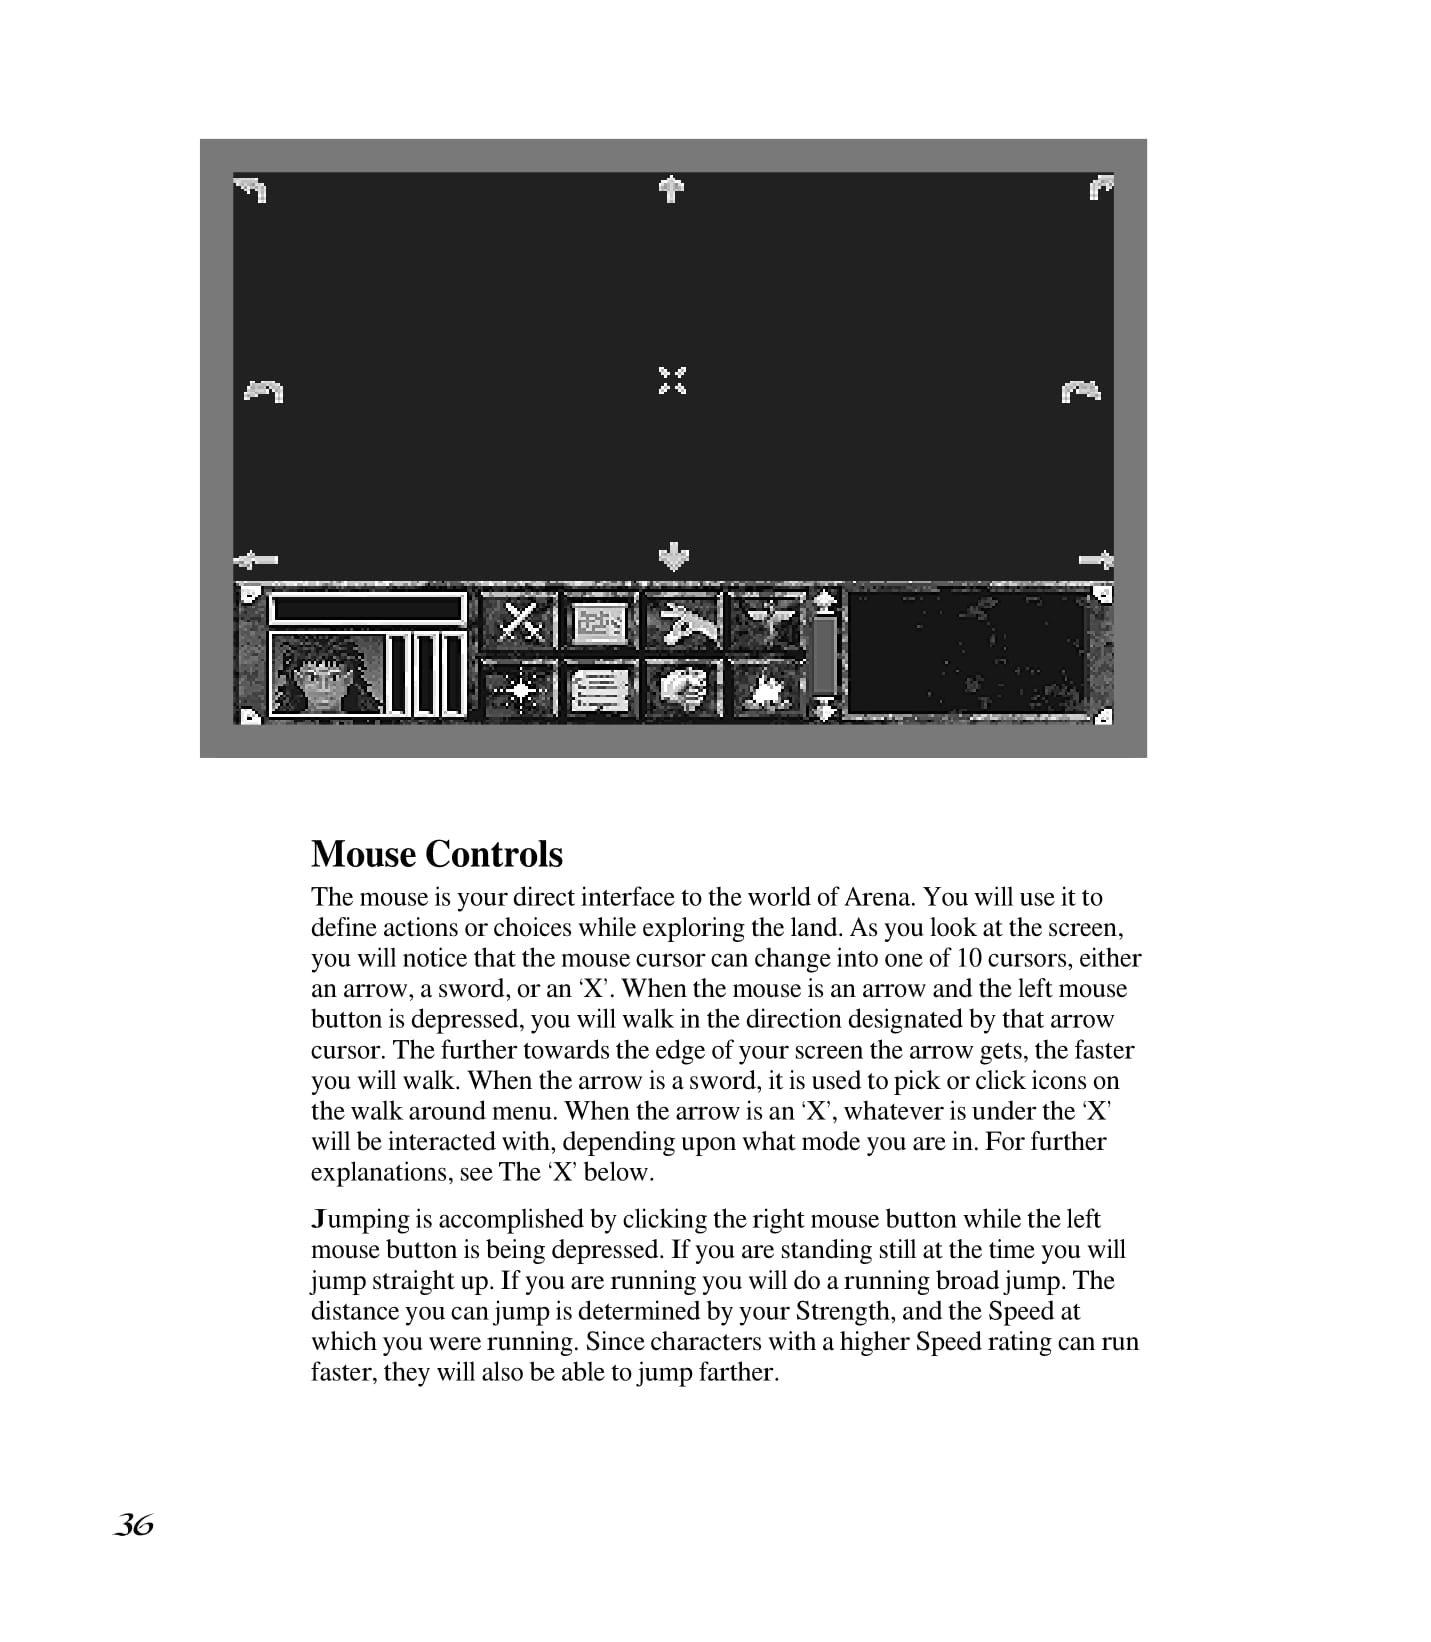 Player's Guide image 46